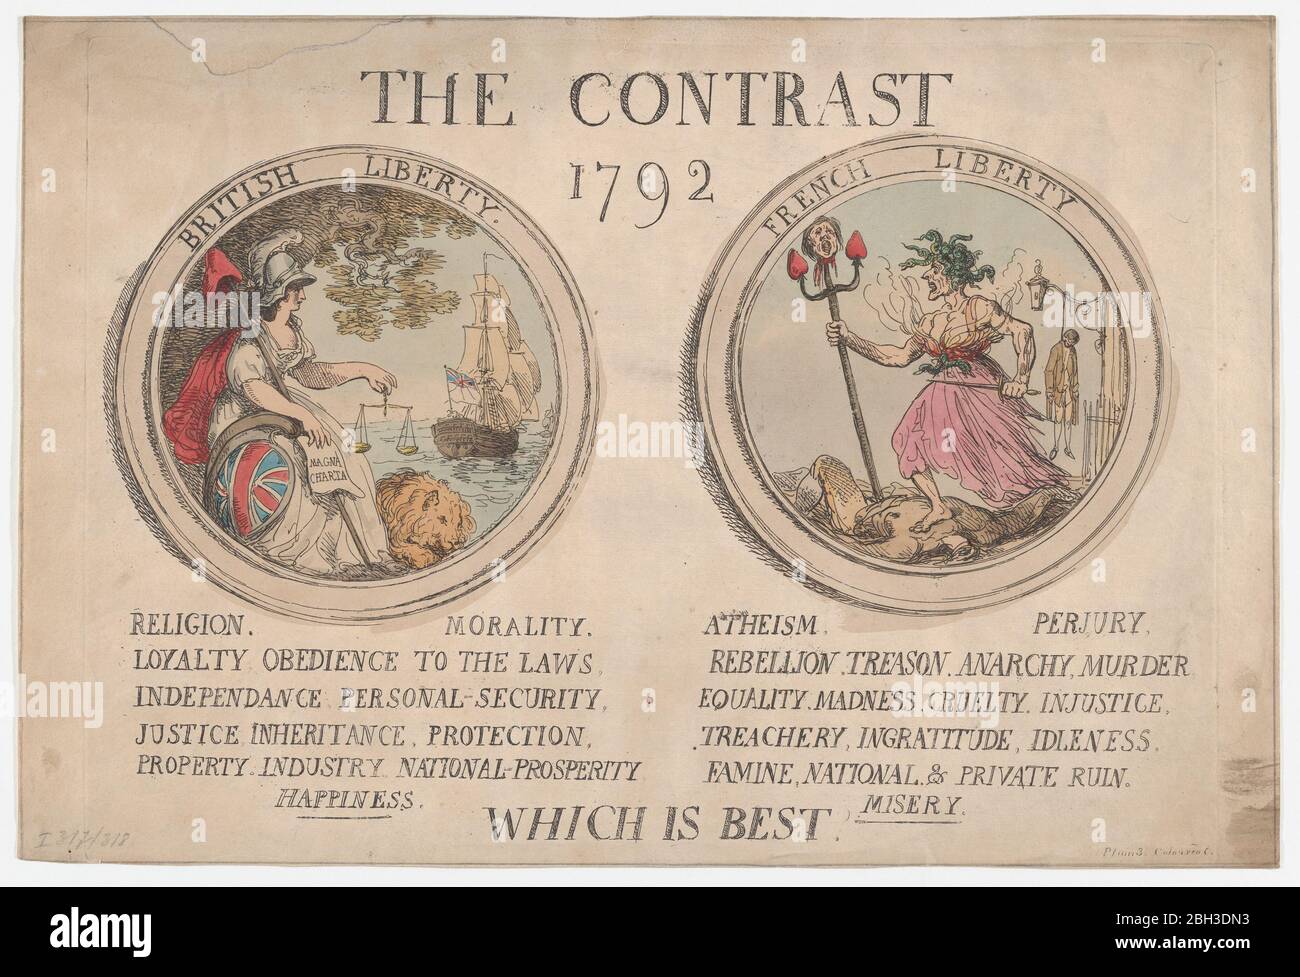 The Contrast, December 1792. Stock Photo